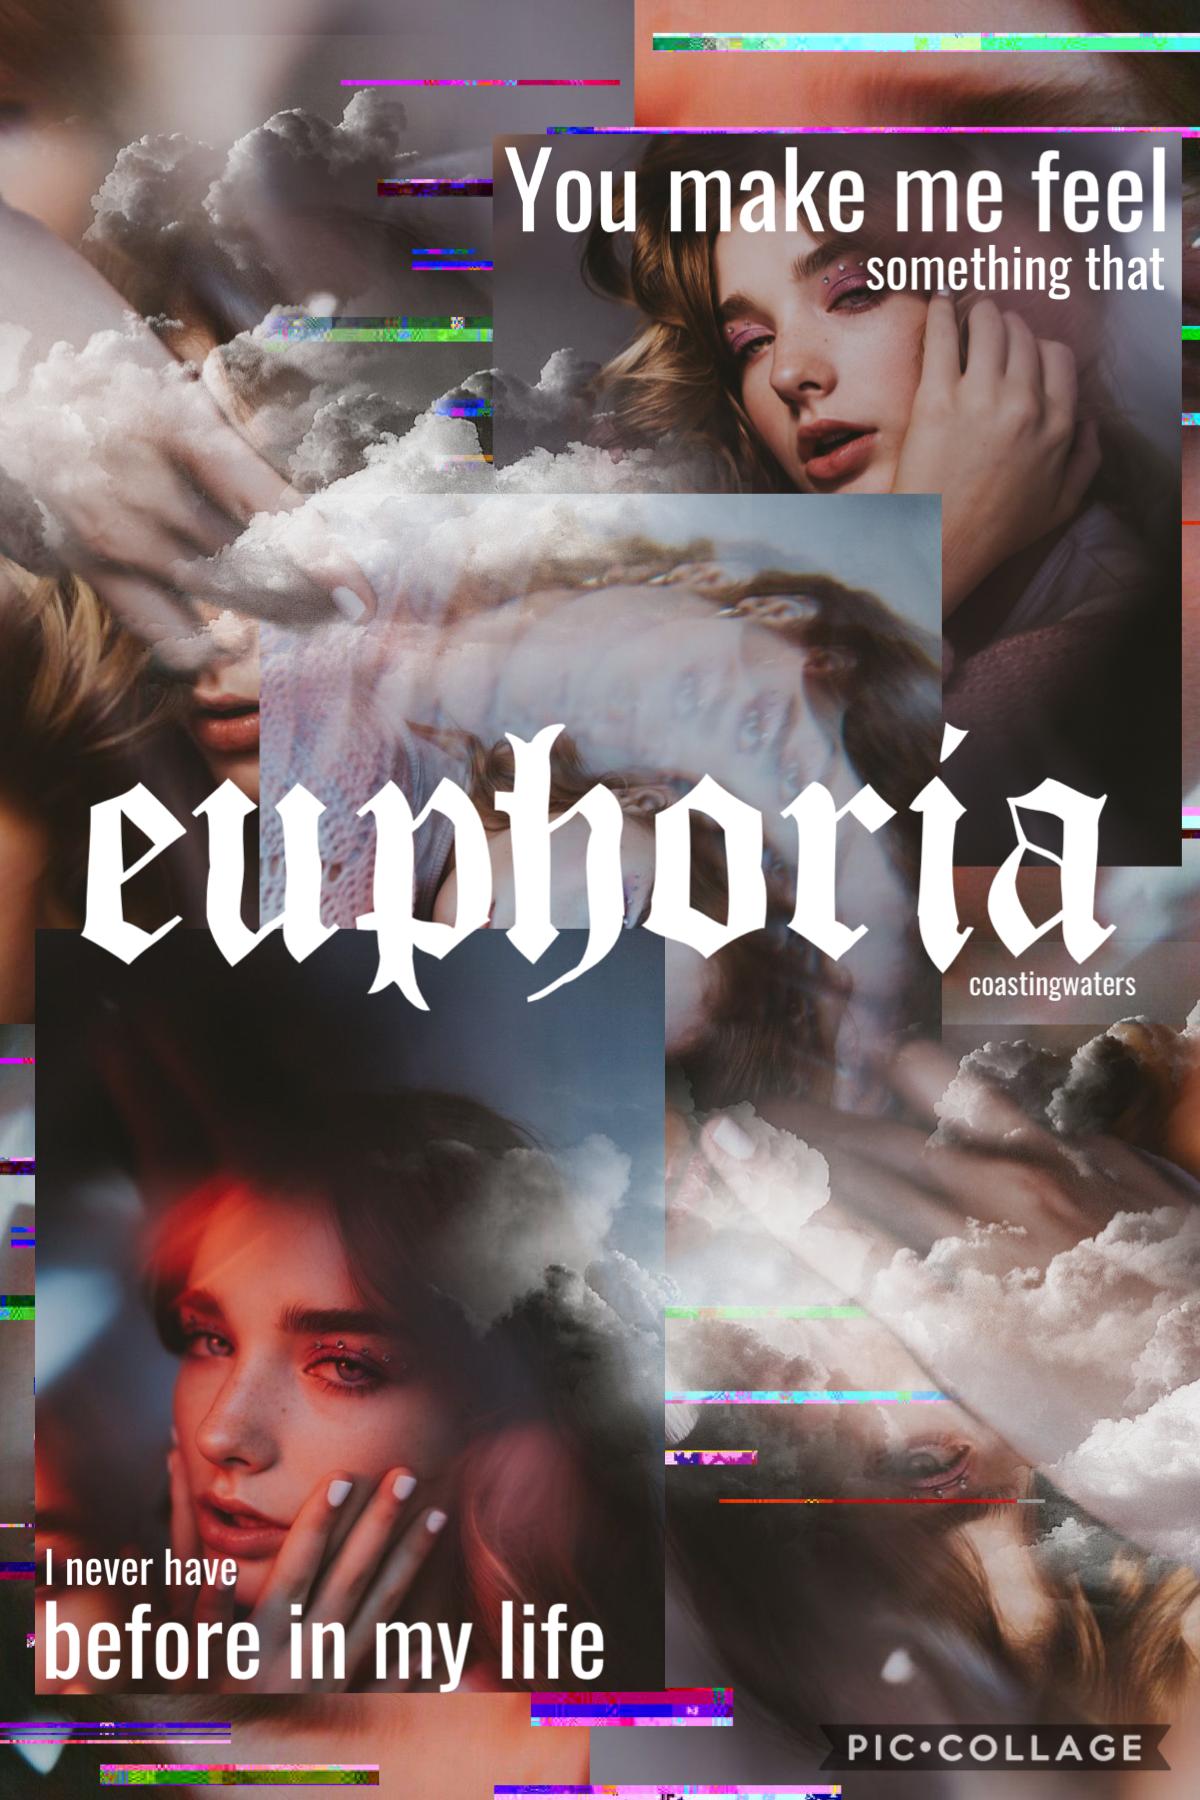 ⌛️17/1/21⌛️
Inspired by Awesome_Bunny! Go follow! I’m literally obsessed with this euphoria theme, I even made a entire Pinterest board with euphoria inspired photos. QOTD: More spanish time! What does this mean? “¿Cual es el nombre de mi hermano?” Make s